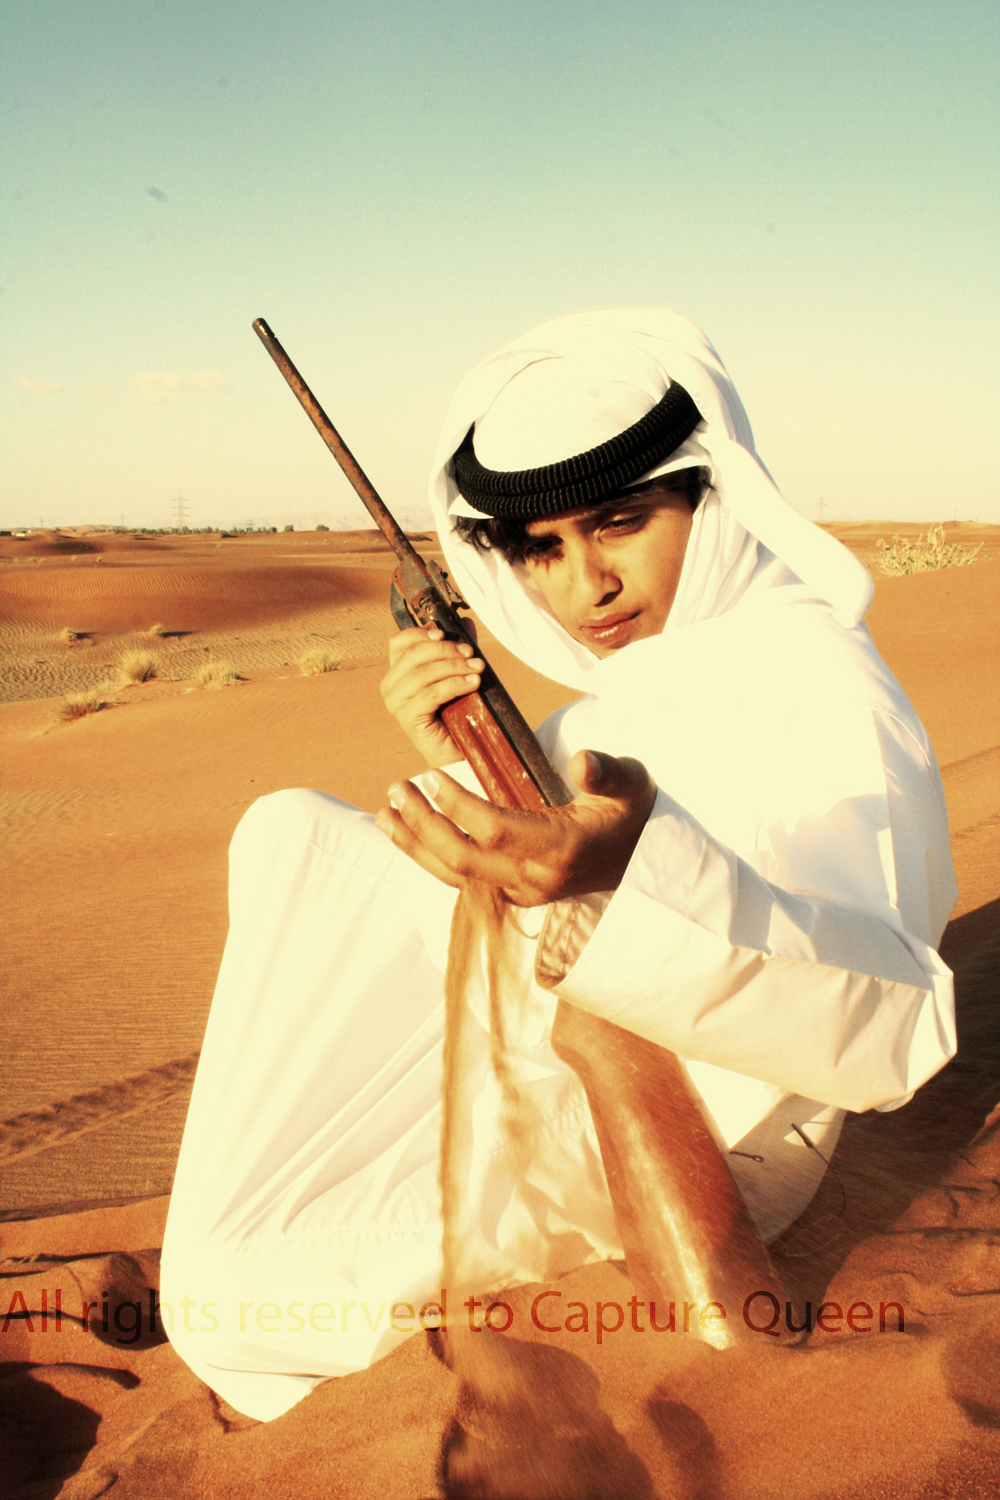 a man is holding a rifle and kneeling in the desert